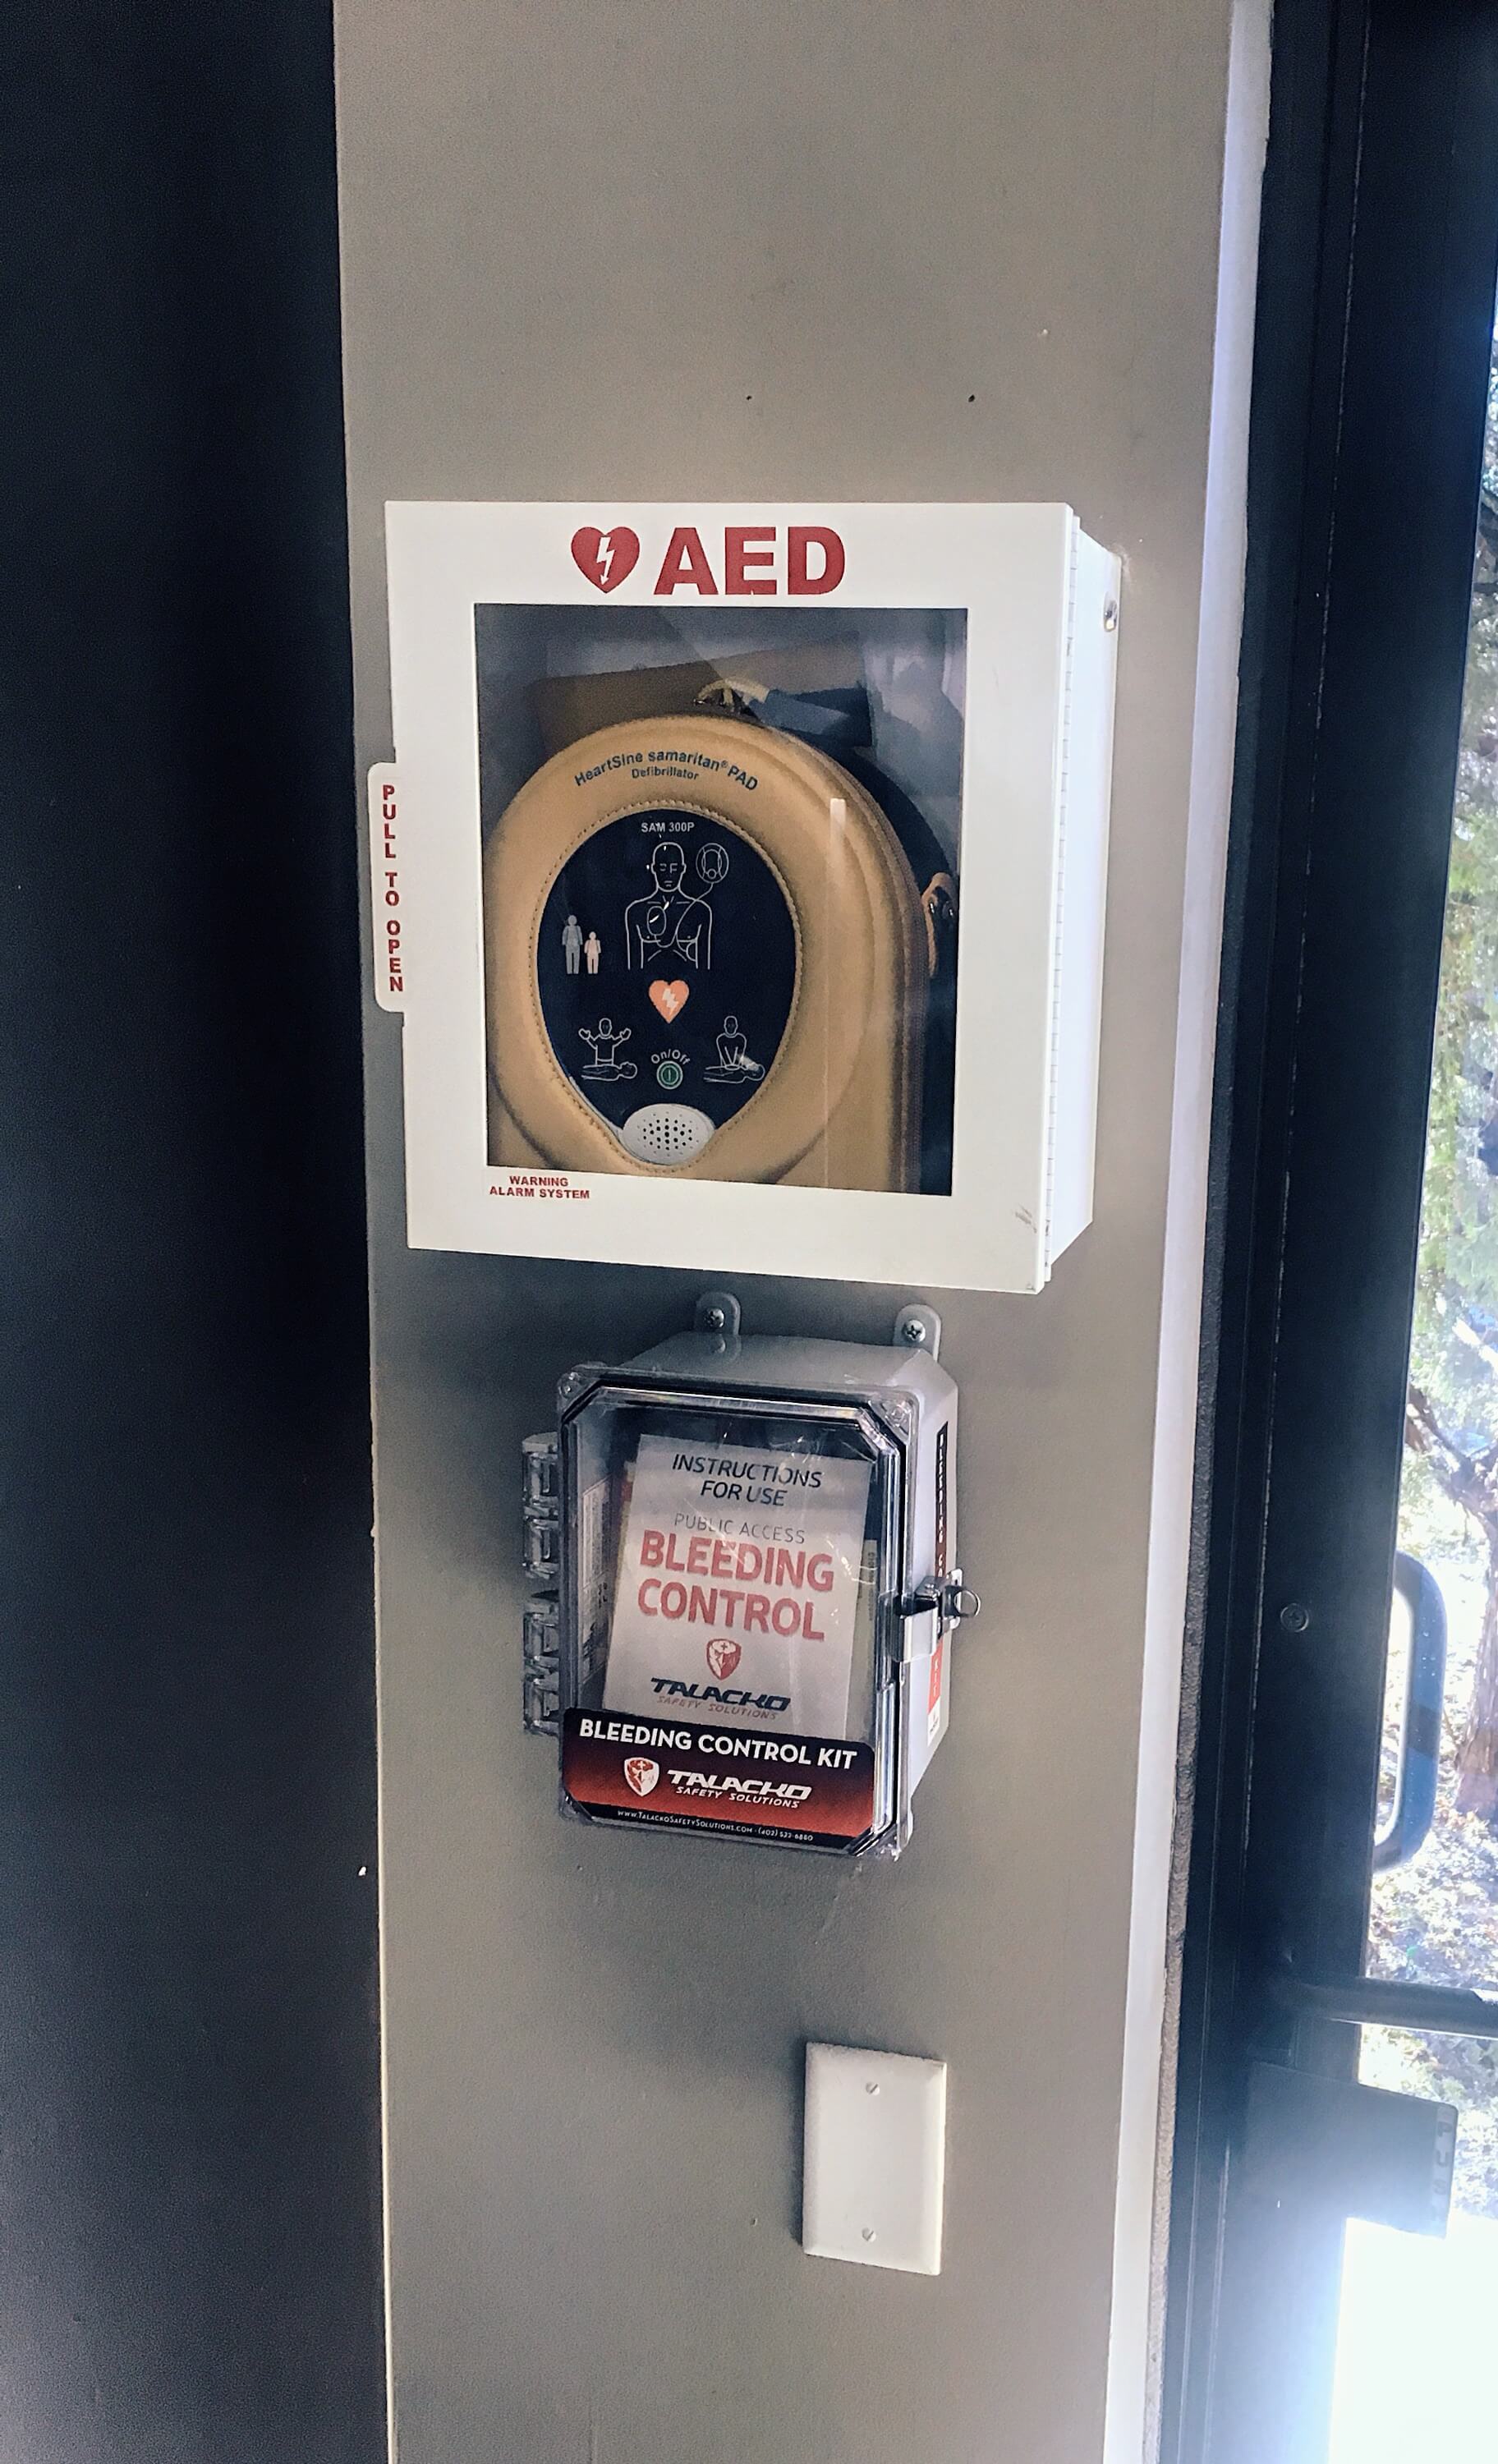 Public access bleeding control stations can be the difference between life and death in the presence of a major bleed.